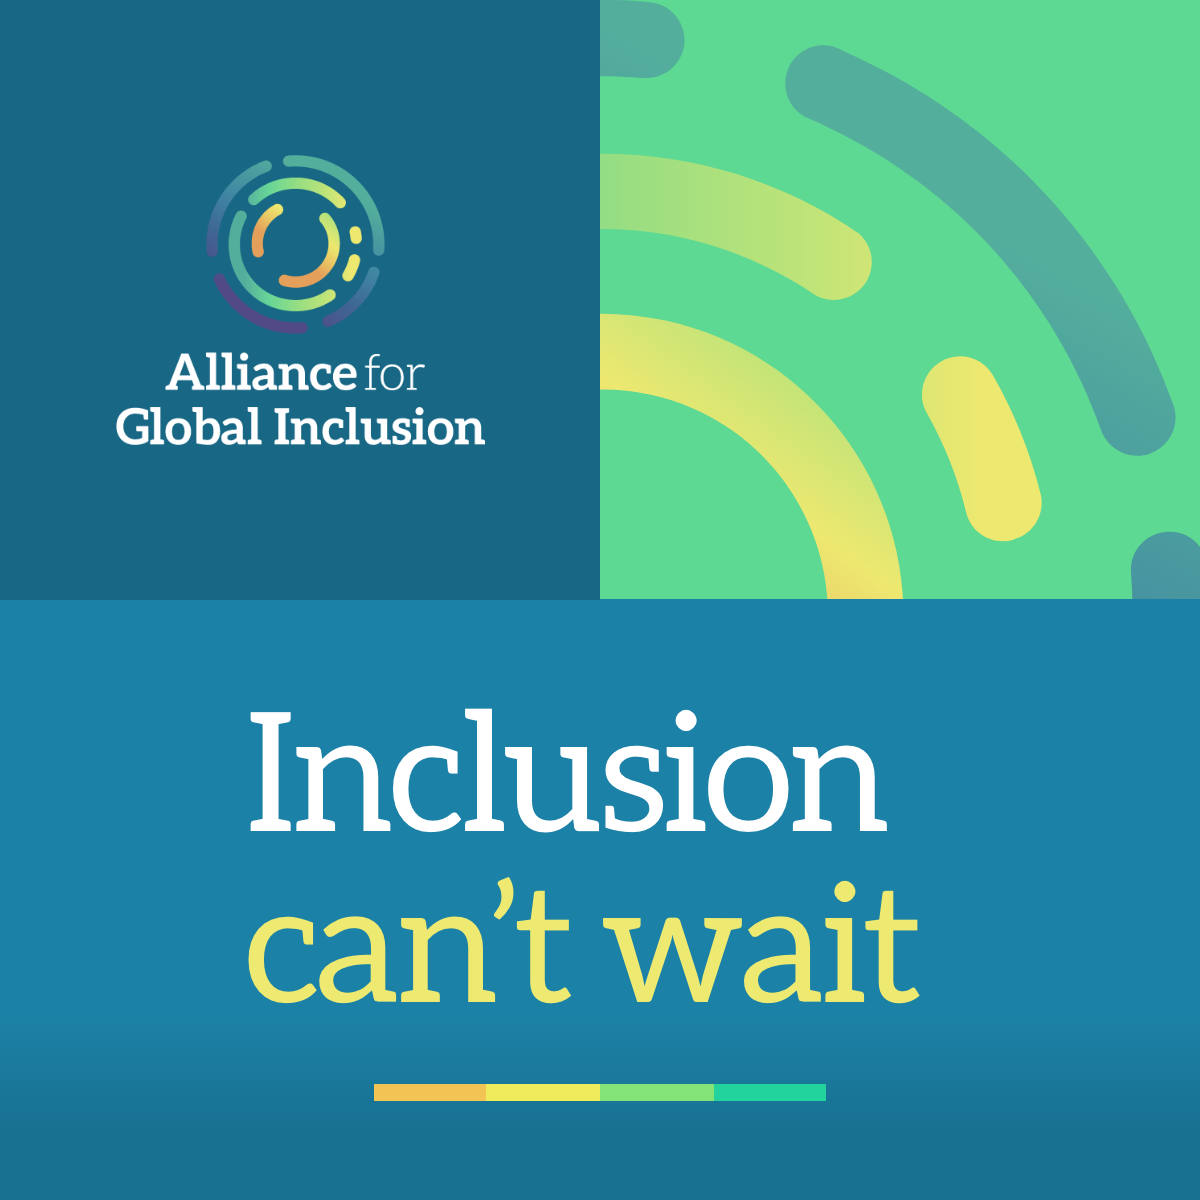 Alliance For Global Inclusion combination mark with the text "inclusion can’t wait", square